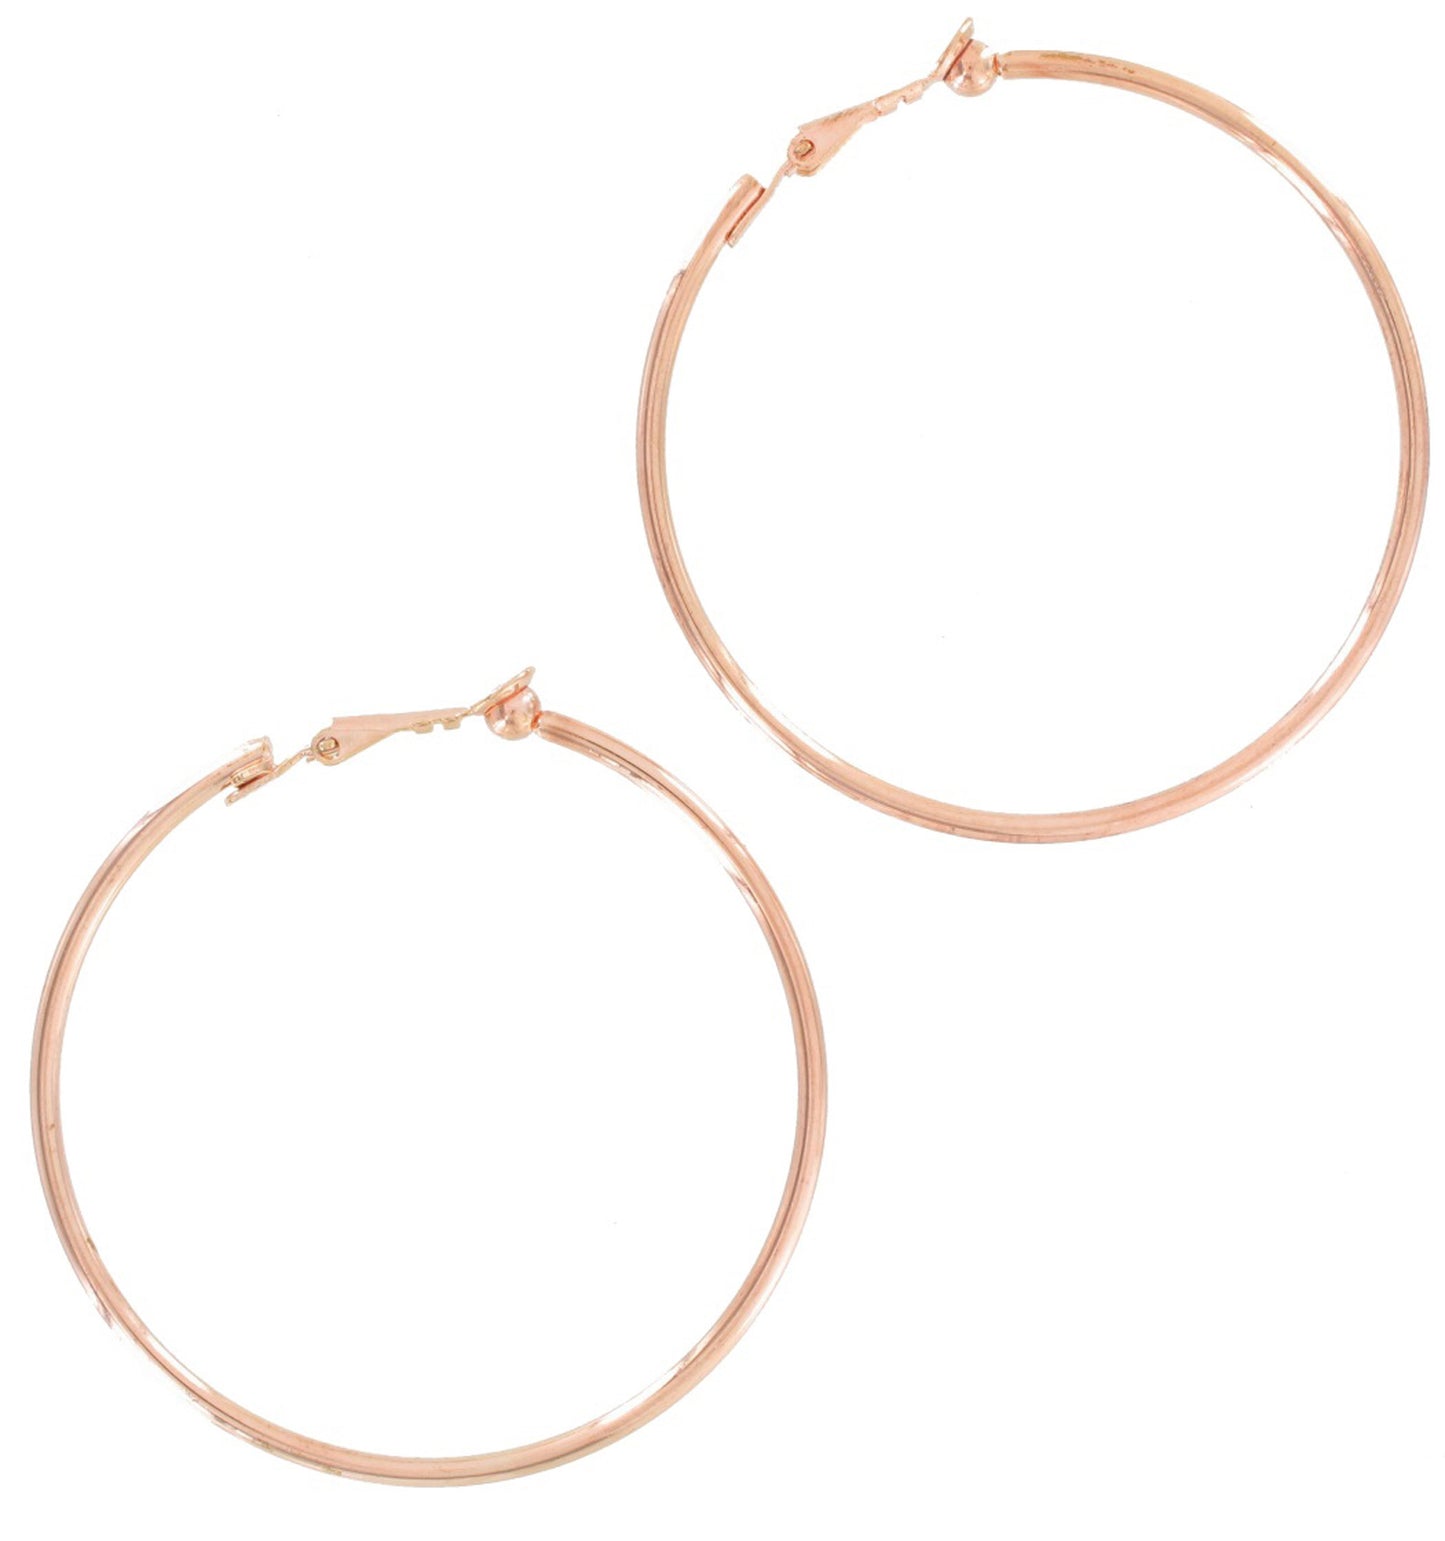 Ky & Co Rose Gold Tone Clip On Hoop Earrings USA Made 2"